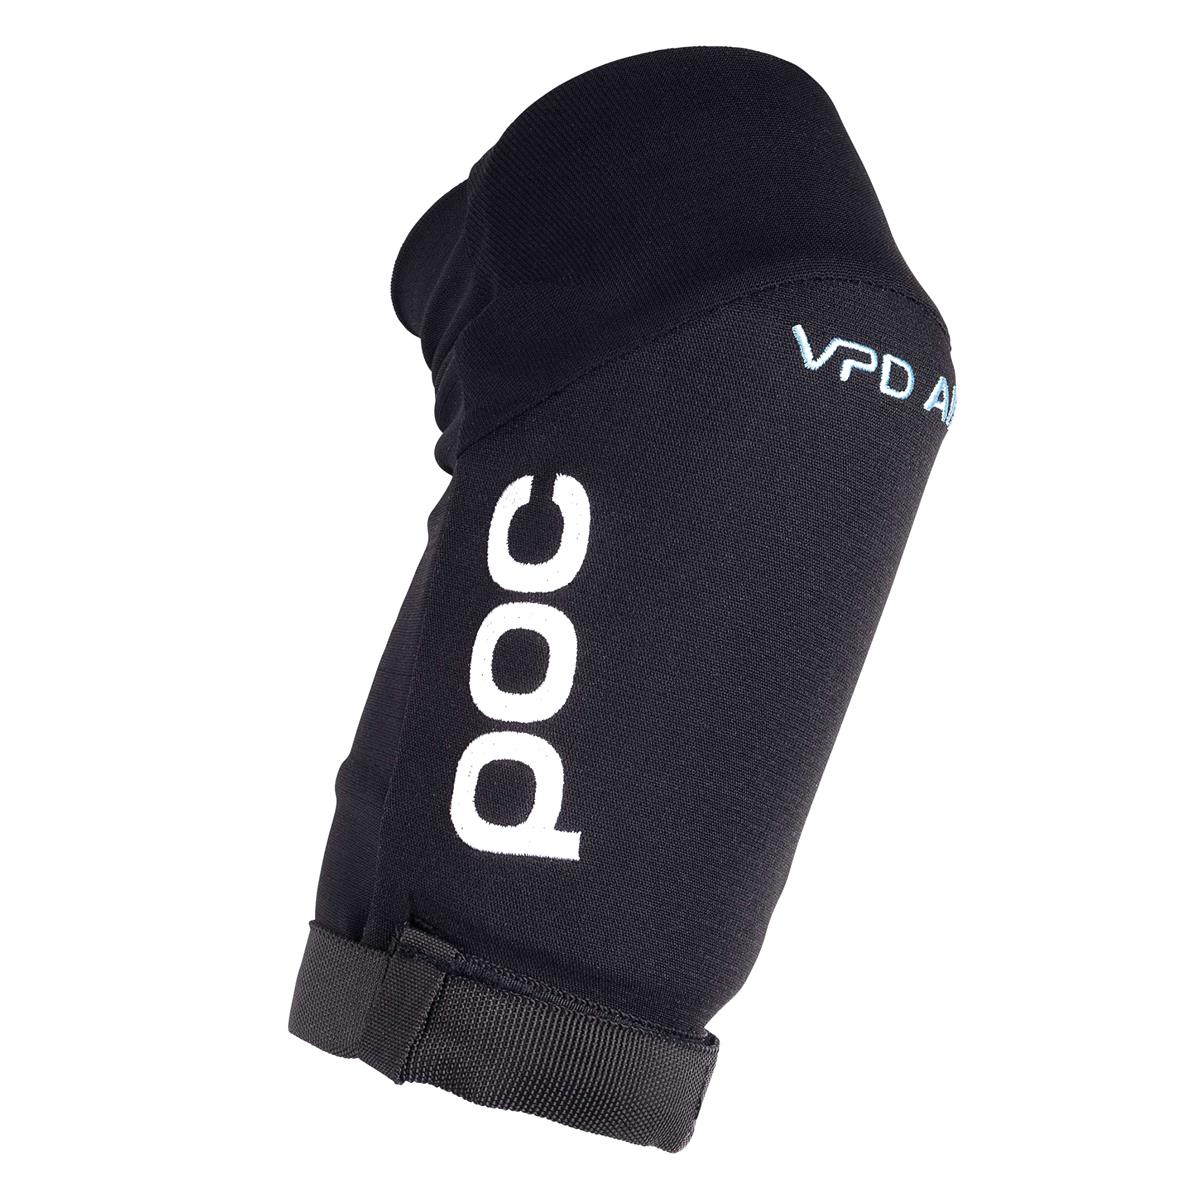 Joint VPD Air Elbow Black Size L